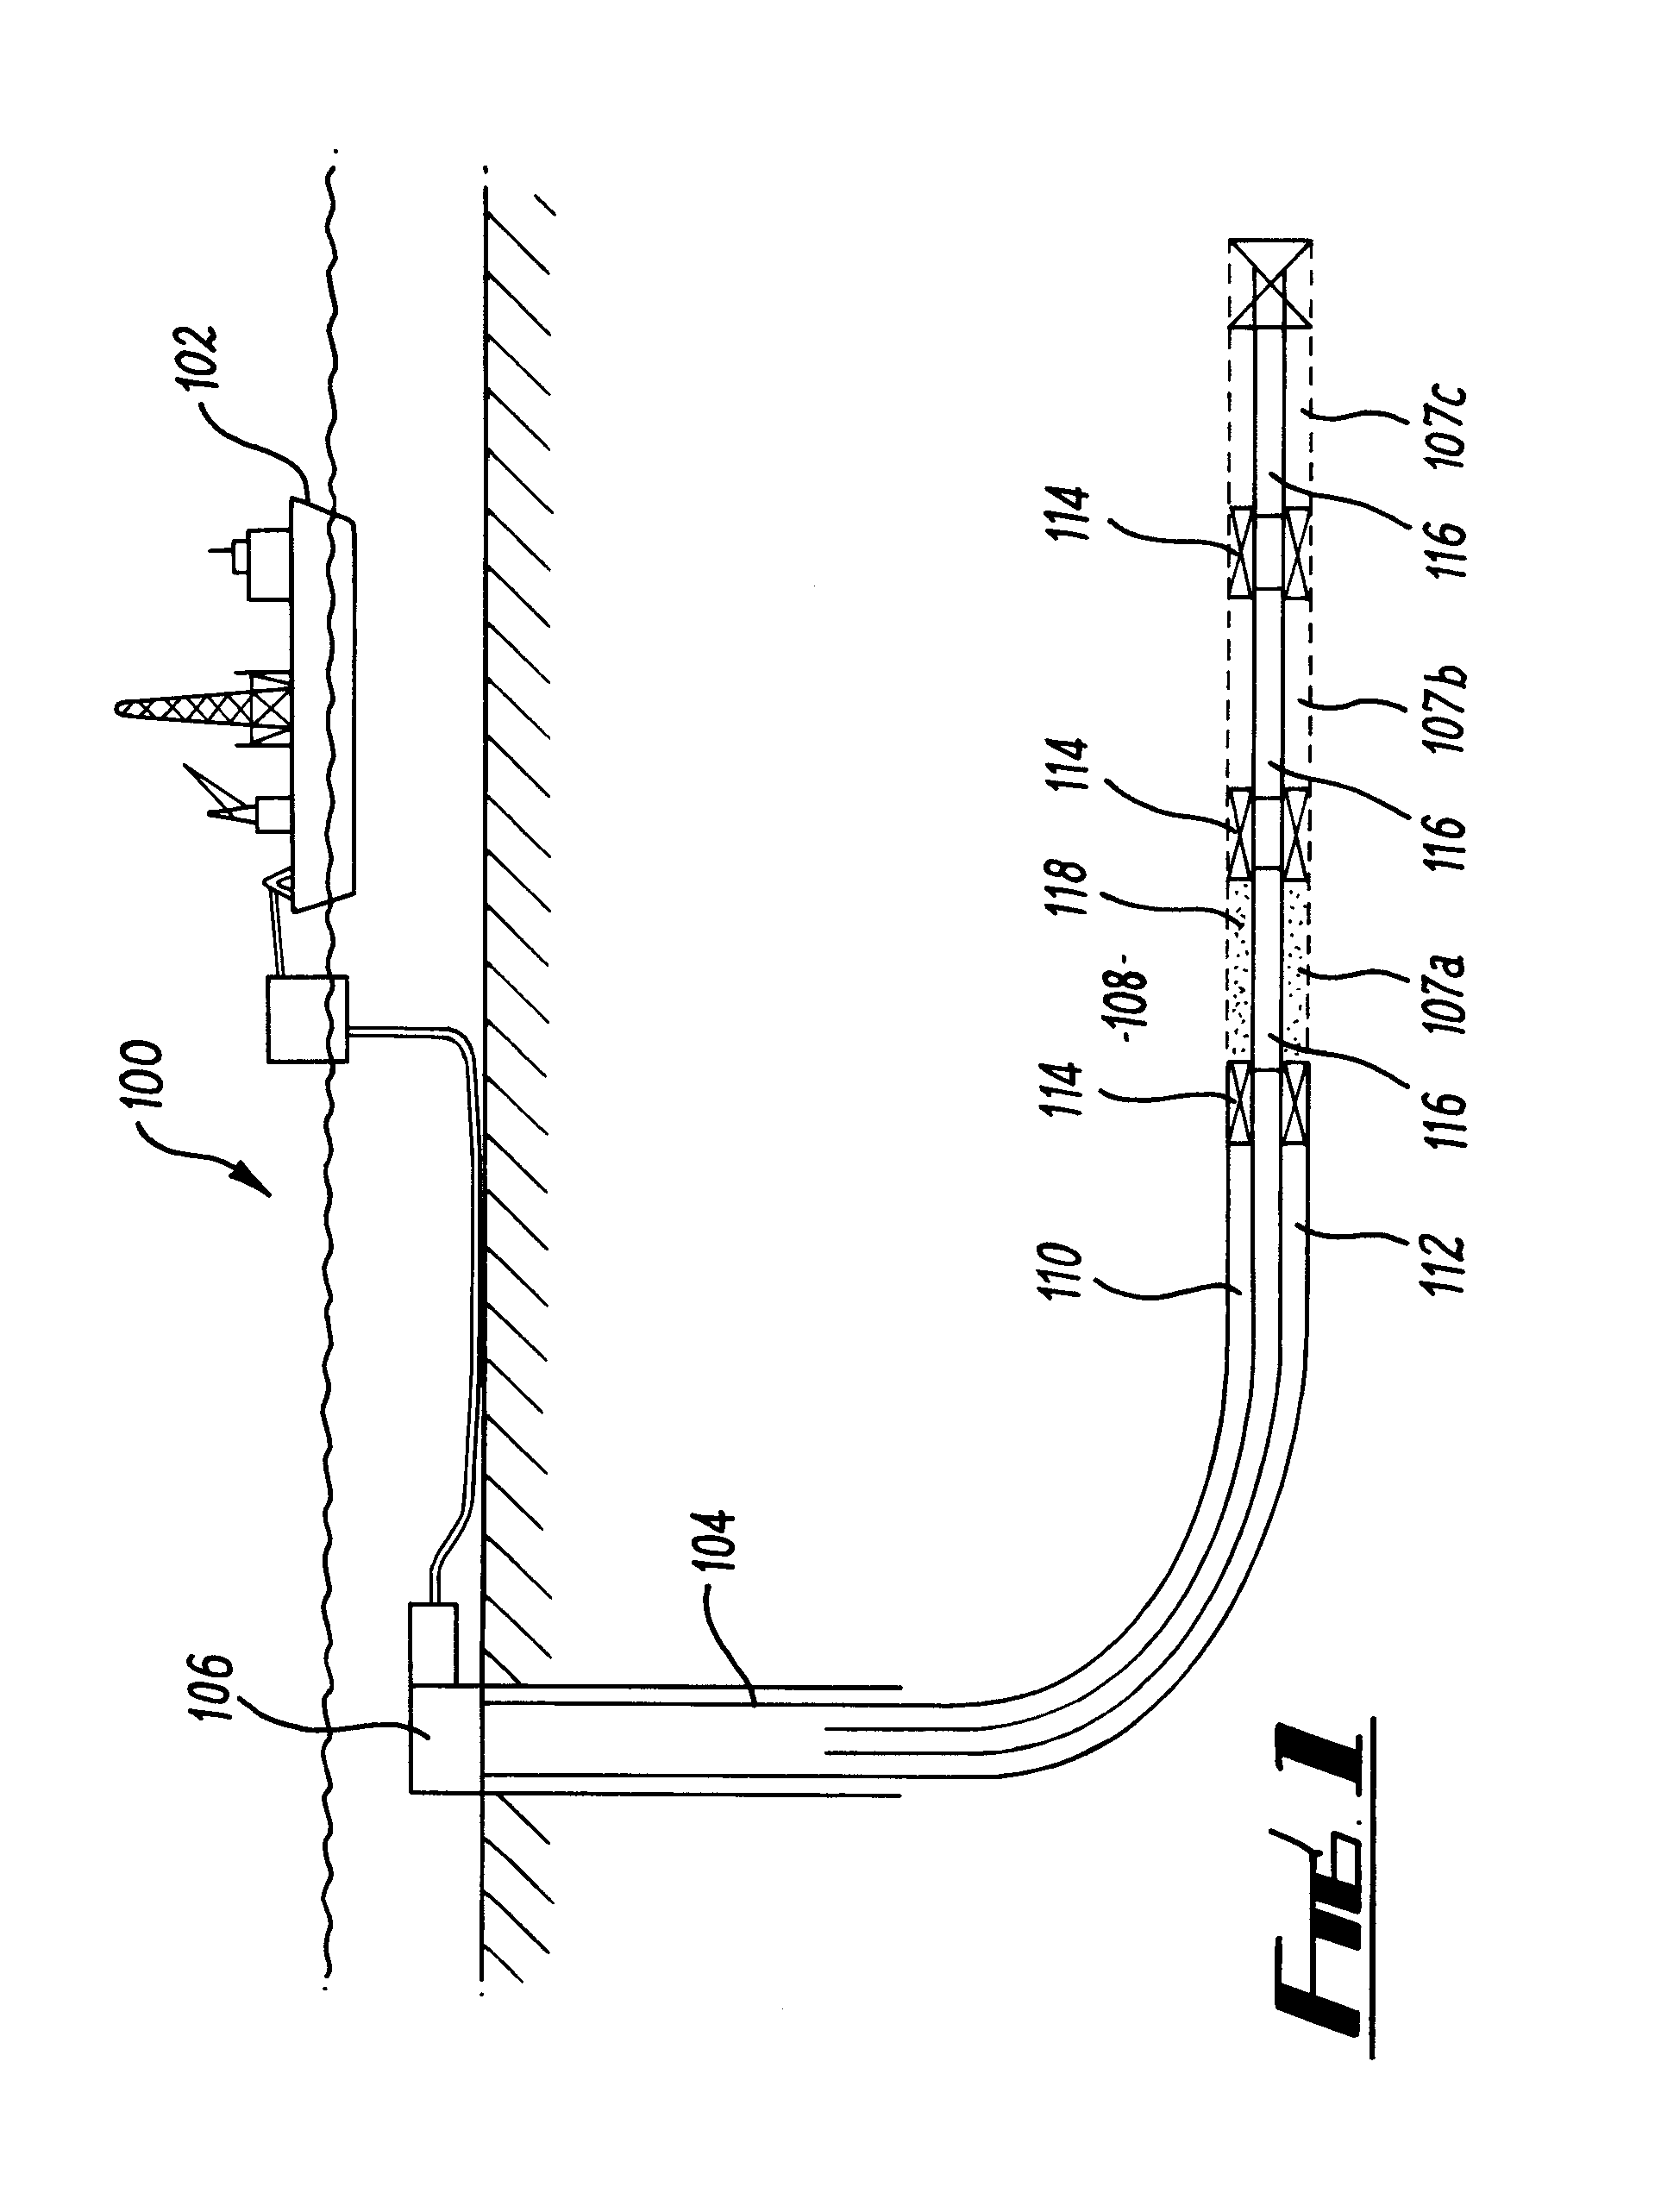 Apparatus and Method for Providing an Alternate Flow Path in Isolation Devices